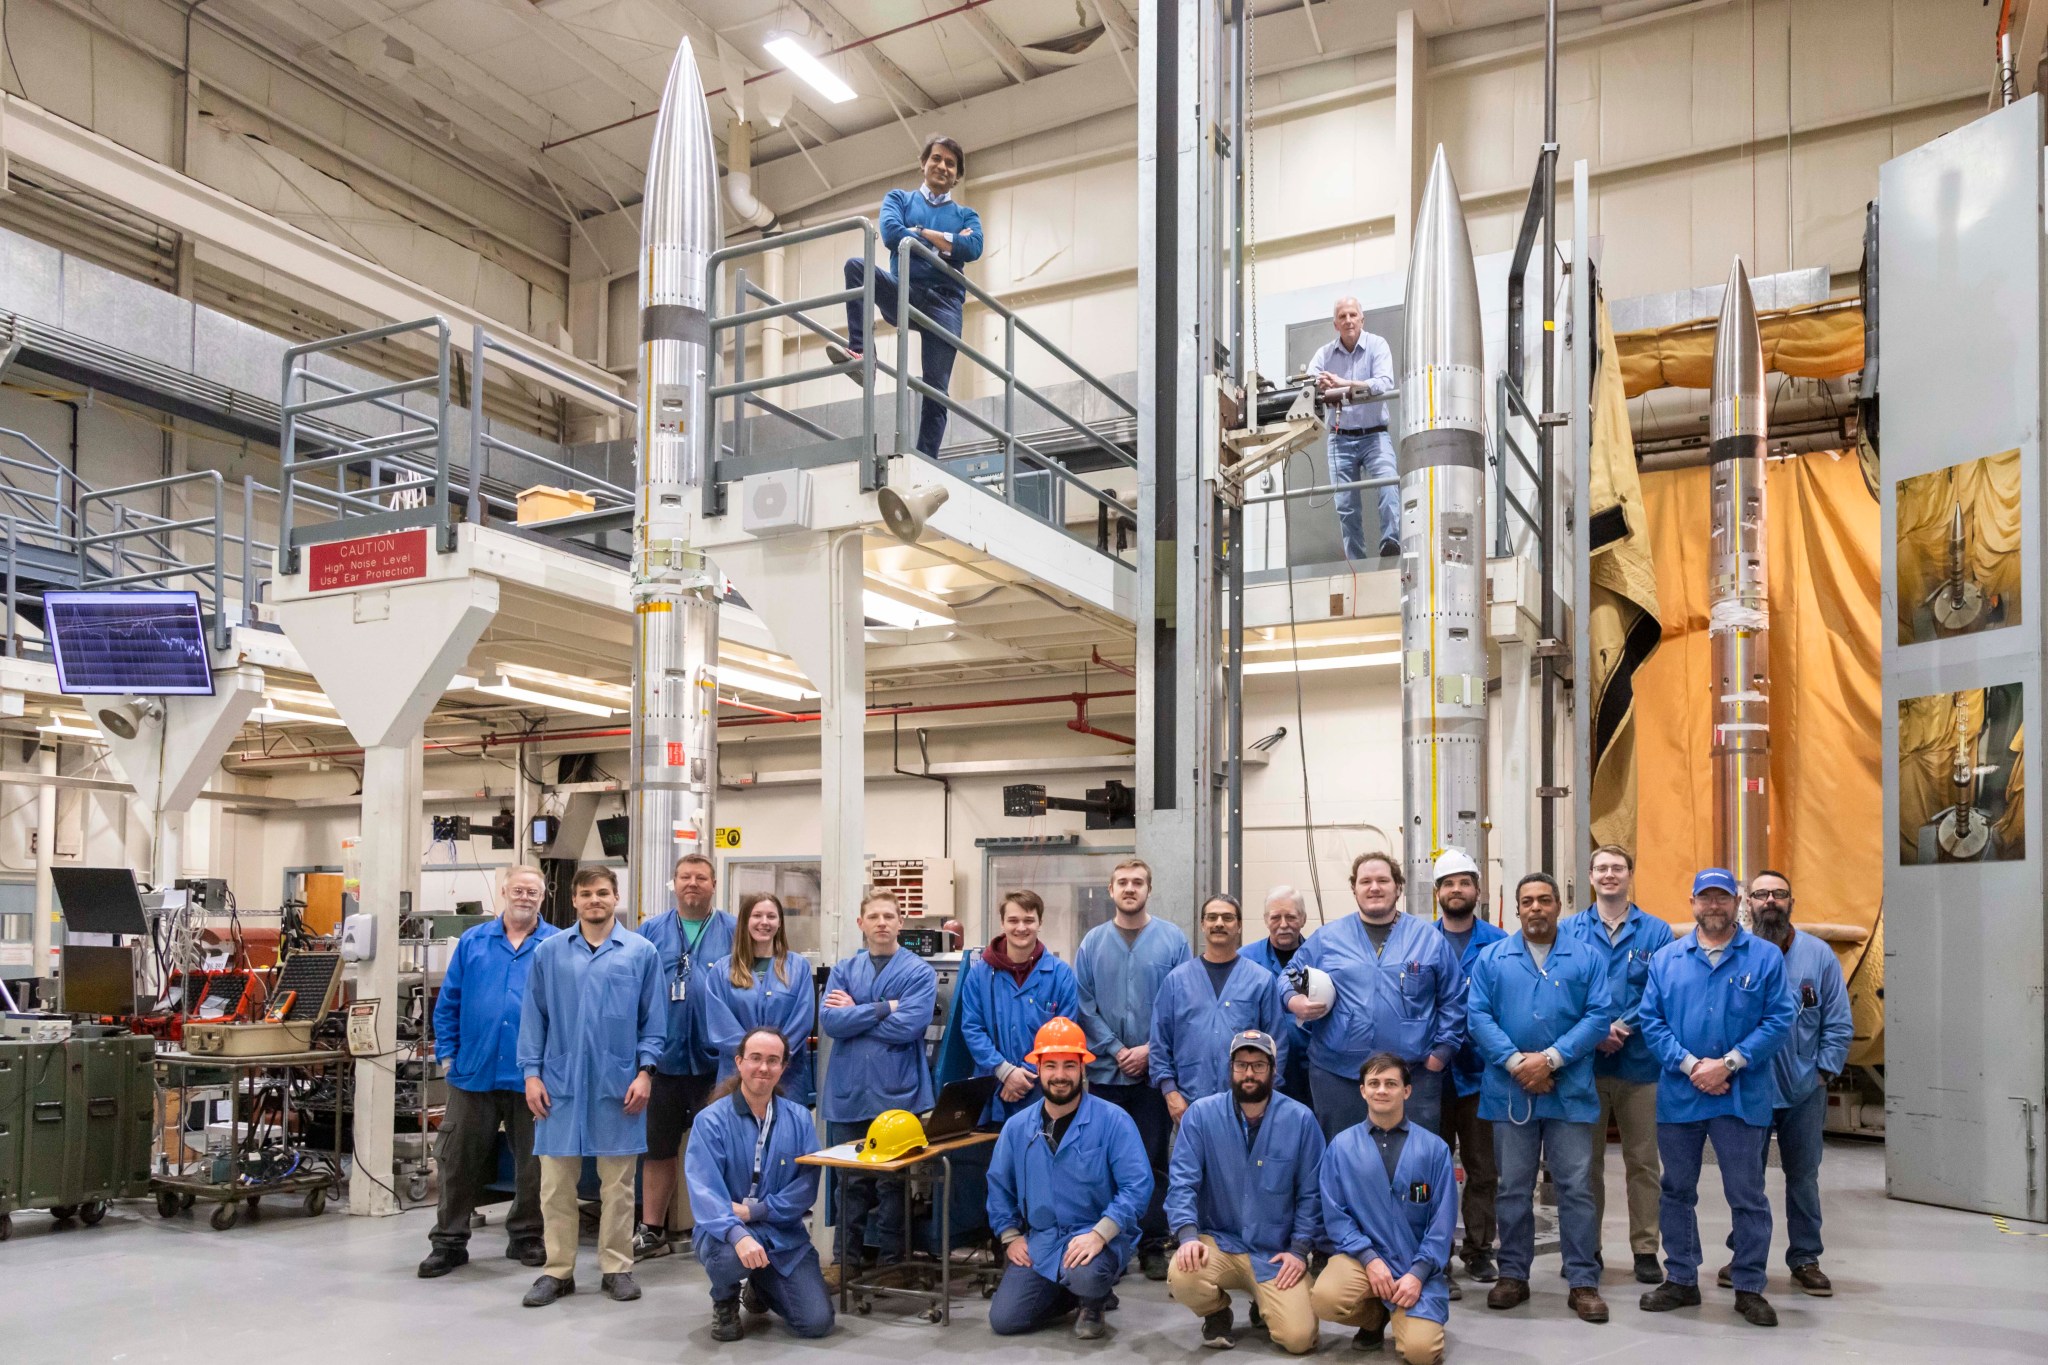 A group of people wearing blue jackets pose for the picture. They stand inside a tall, industrial room. Three silver rockets are behind them.